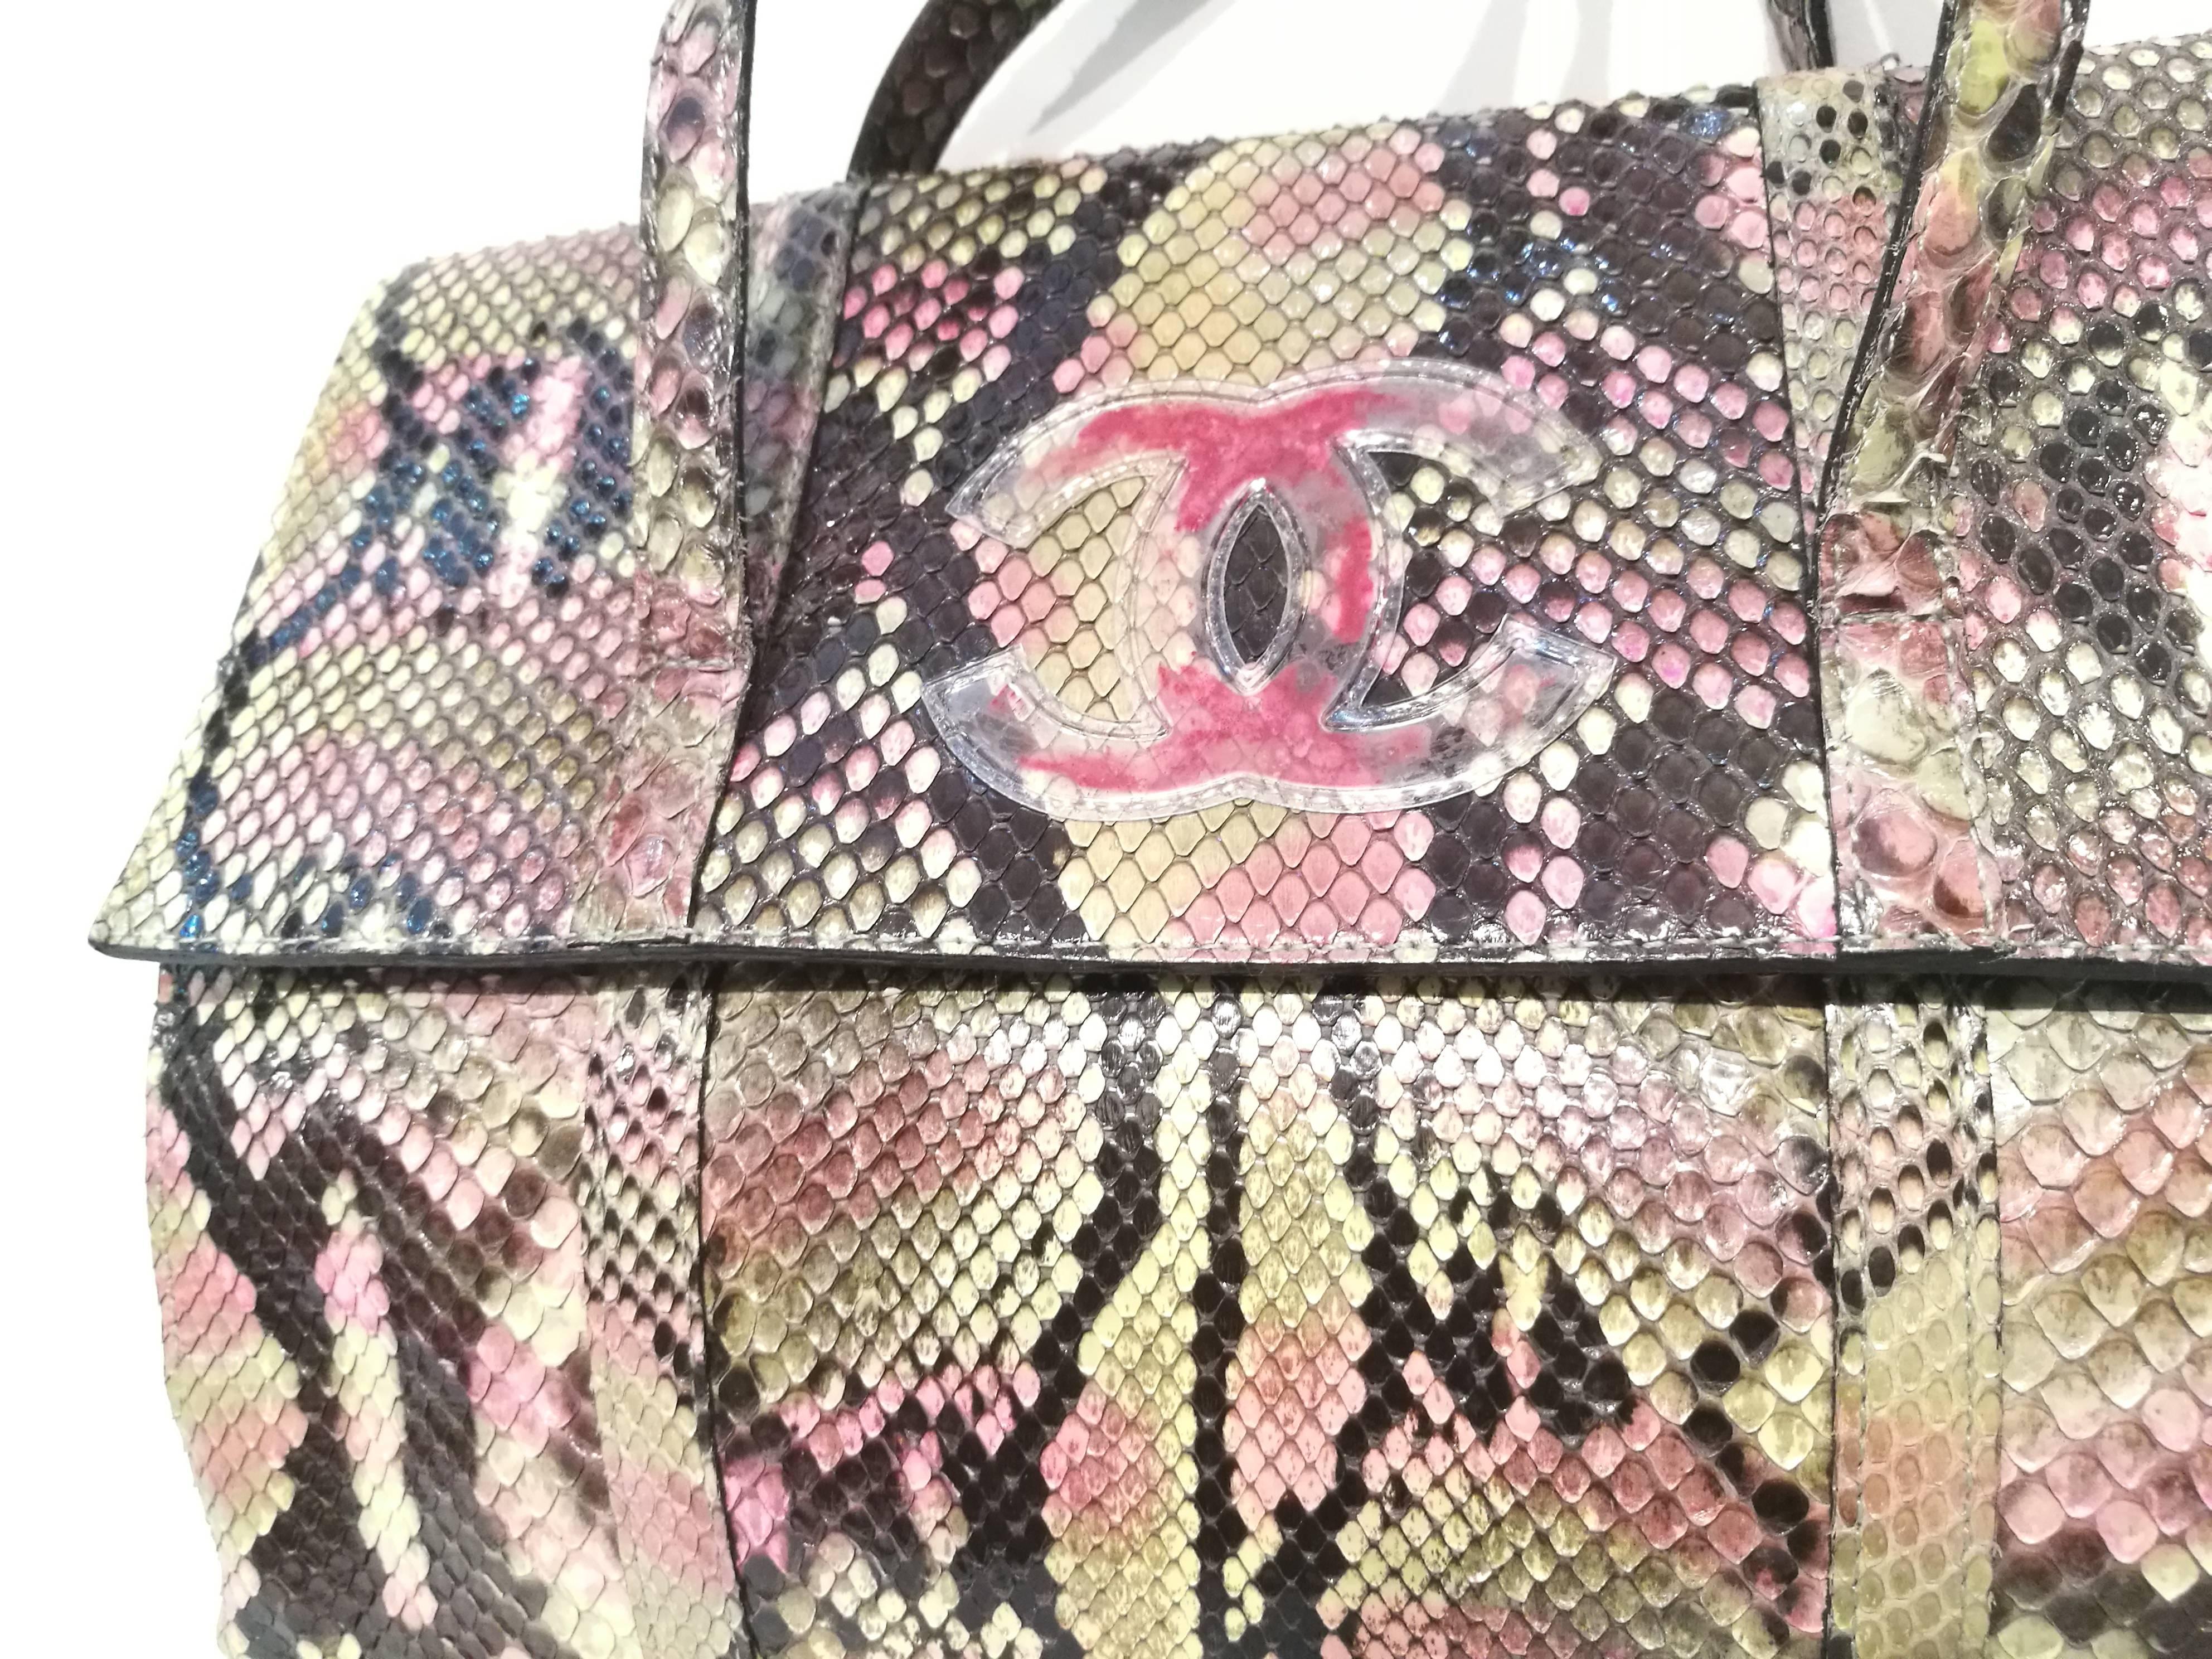 This vintage Chanel python bag features a multicolored python body with the signature CC stitched on the front and a convenient top handle.

Material: Python
Color: Multi
Condition: Excellent
Circa: 1997-1999